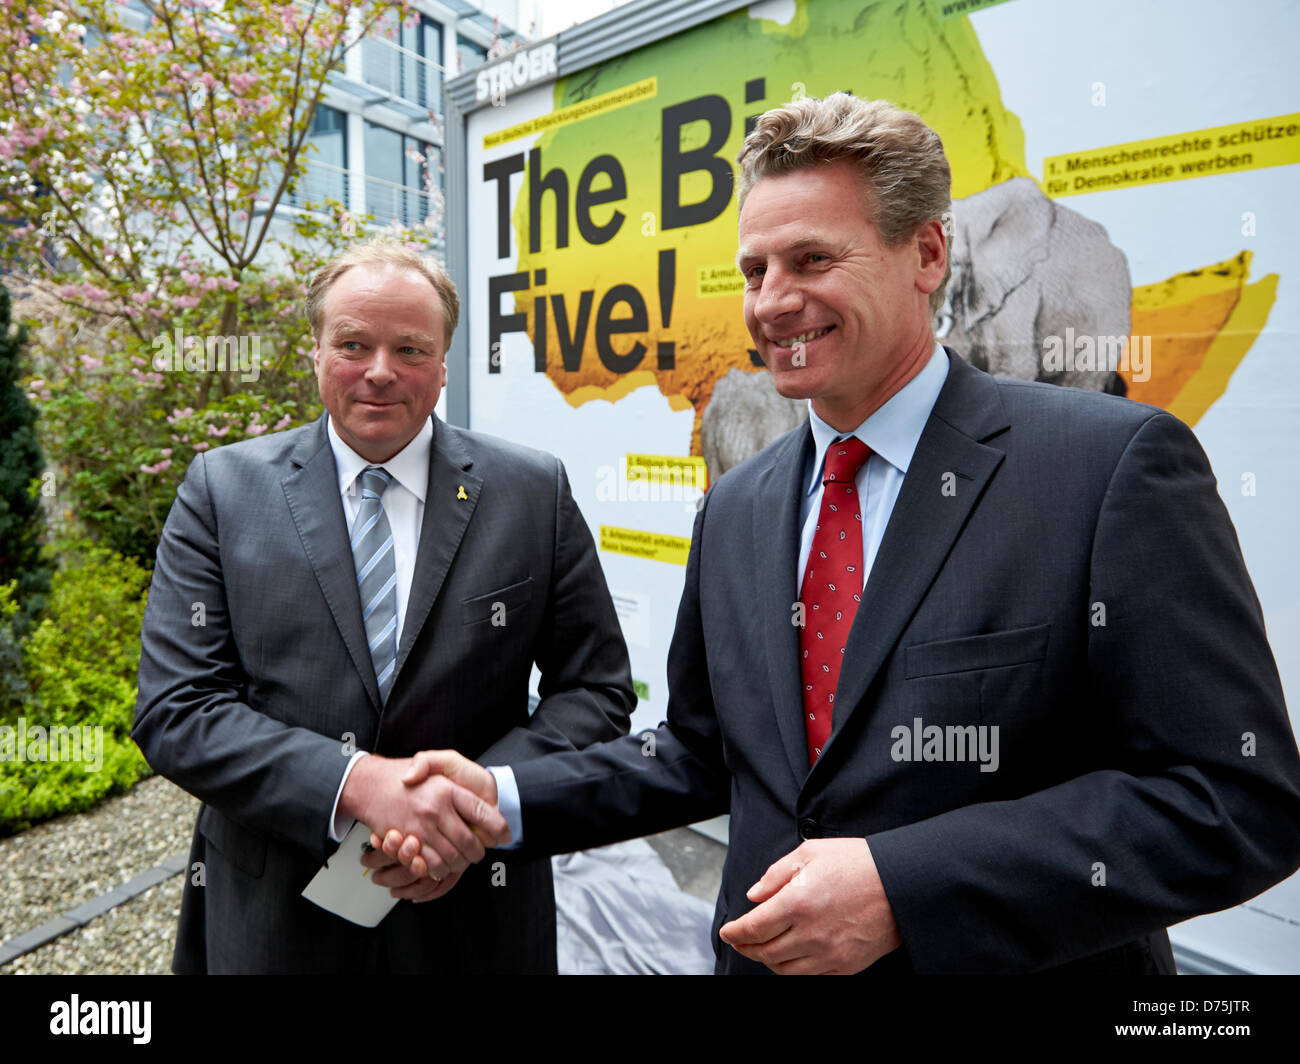 Berlin, 29 April 2013. Start of the national campaign 'The Big Five' with Dirk Niebel. Dirk Niebel, Federal Minister for Economic Cooperation and Development and Eberhard Brandes, CEO of WWF Germany, present the new nationwide poster campaign 'The Big Five' of the Federal Ministry for Economic Cooperation and Development. / Development Minister Dirk Niebel shakes hands with Eberhard Brandes, CEO of WWF Germany, at the Start of the national campaign 'The Big Five' in Berlin. Credit:Reynaldo Chaib Paganelli/Alamy Live News Stock Photo